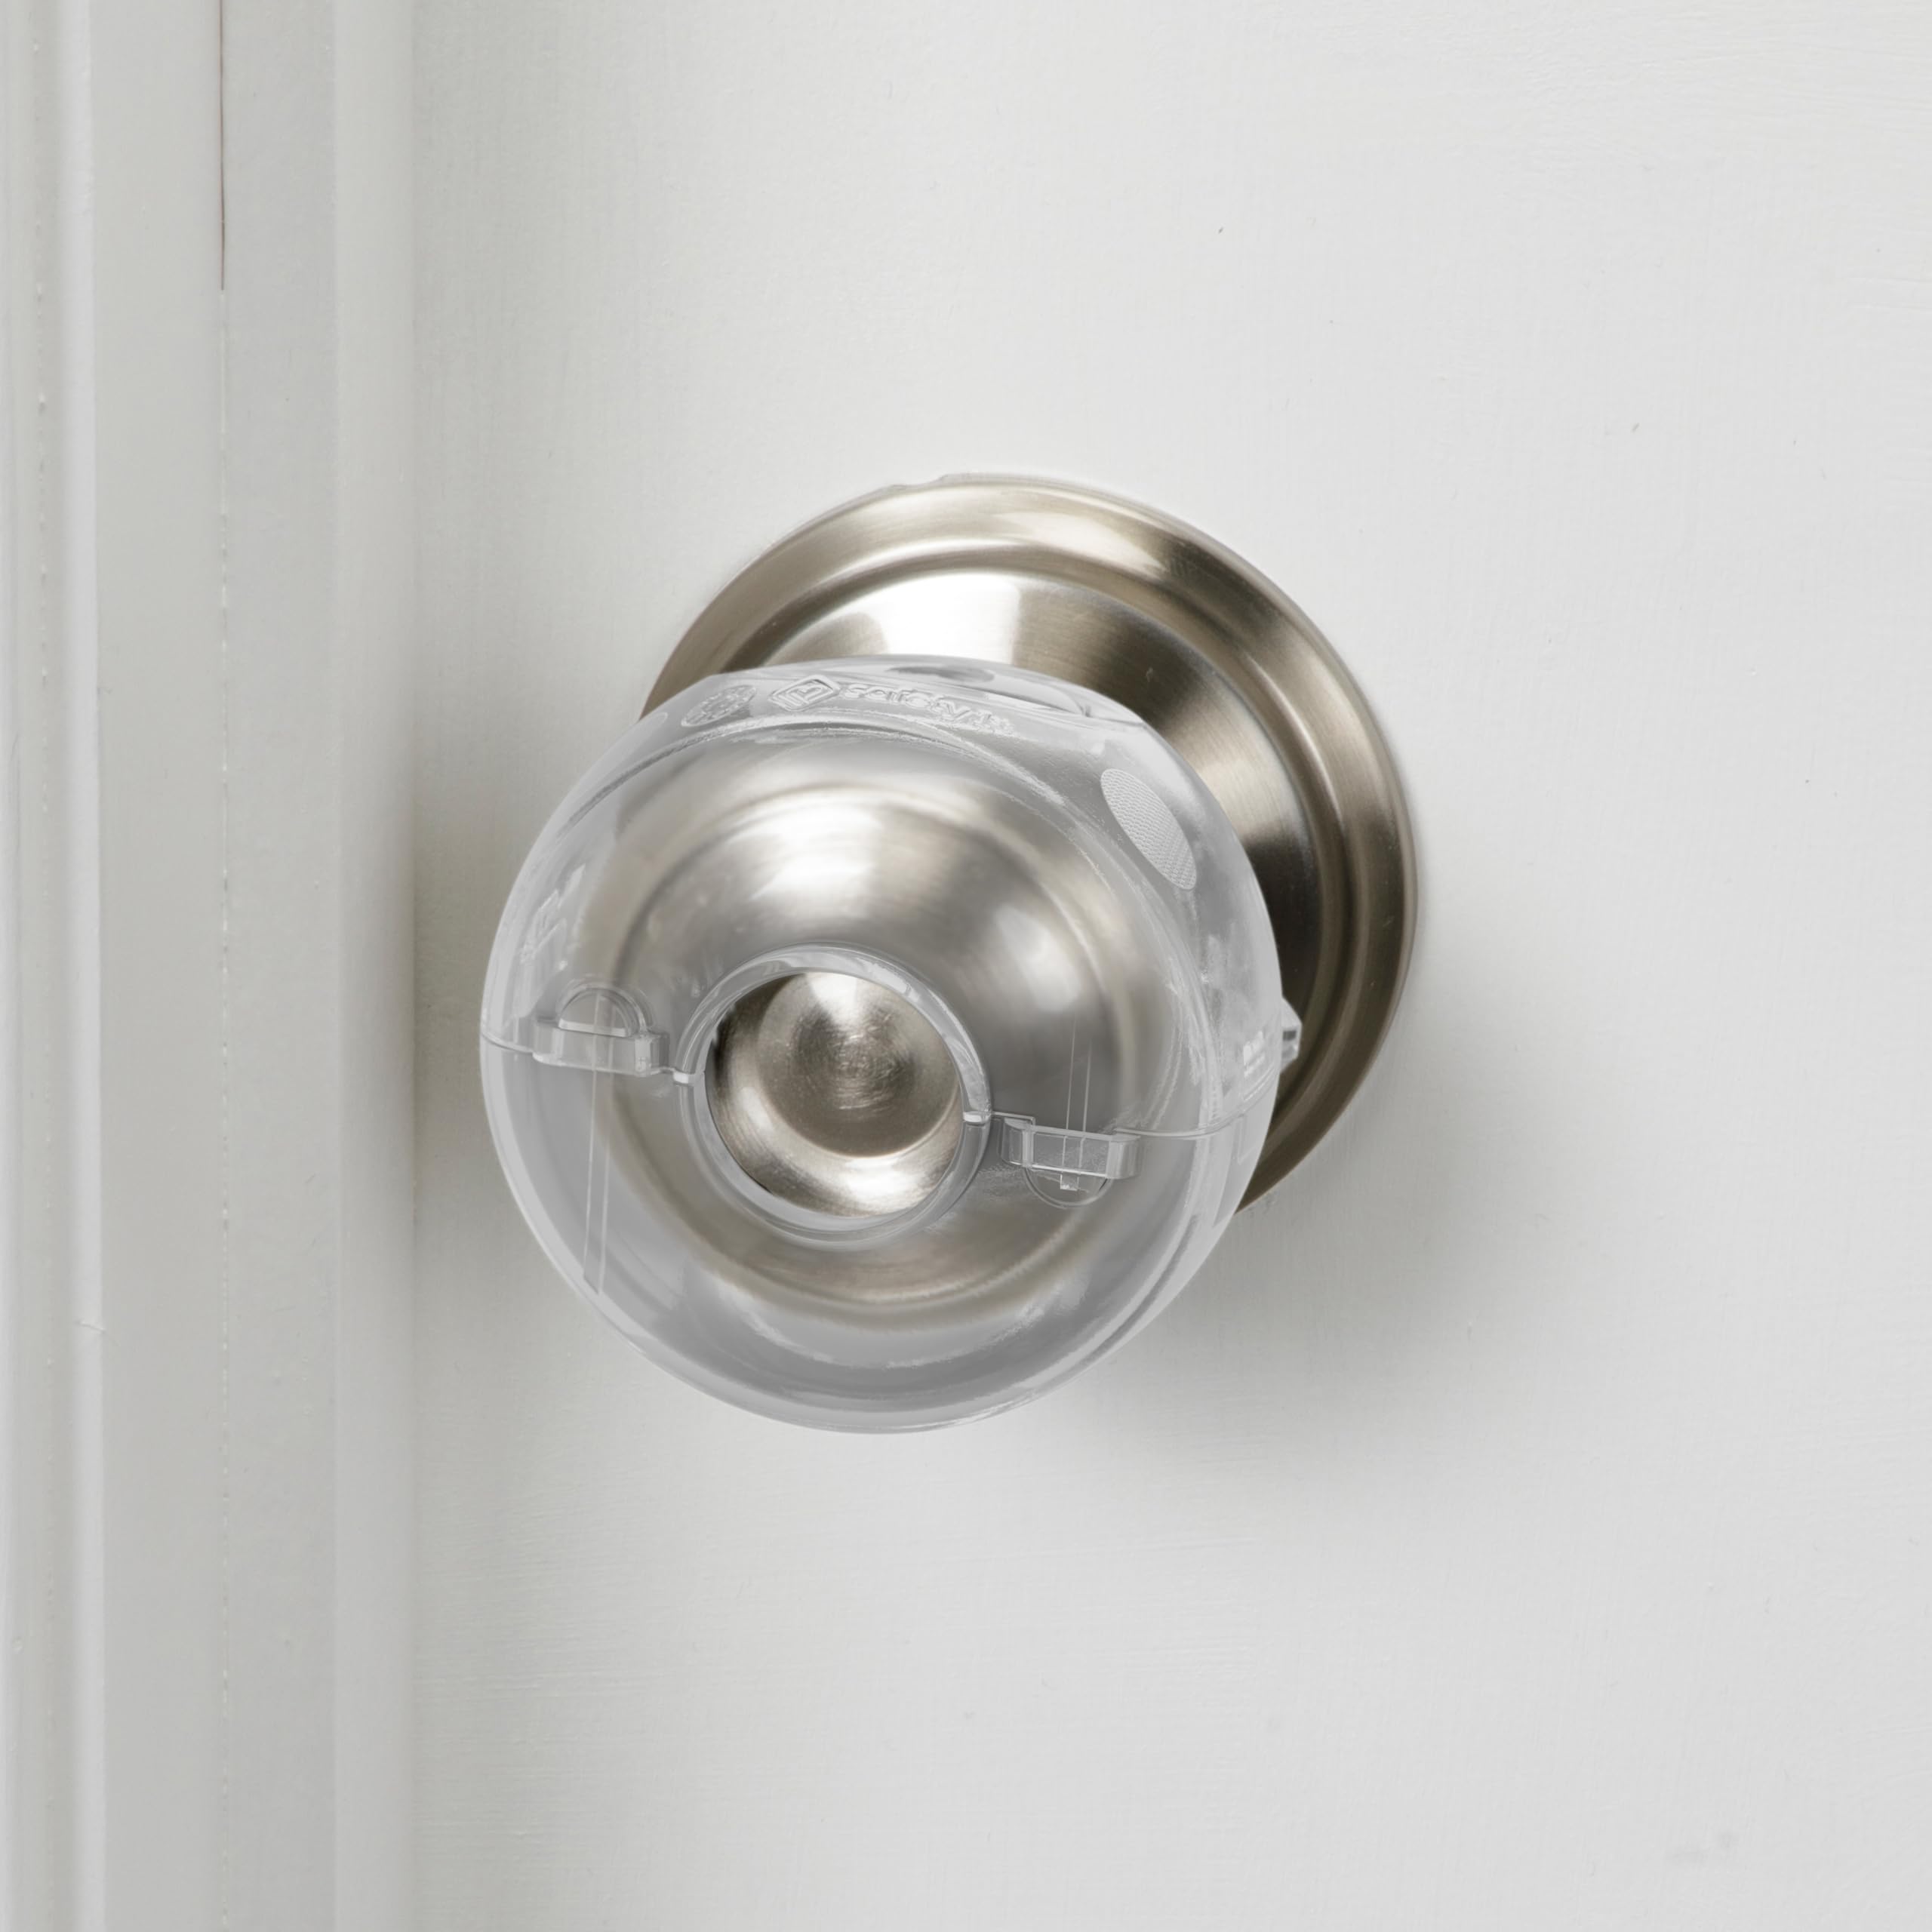 Safety 1ˢᵗ® Parent Grip Door Knob Covers 3 Pack, Crystal Clear